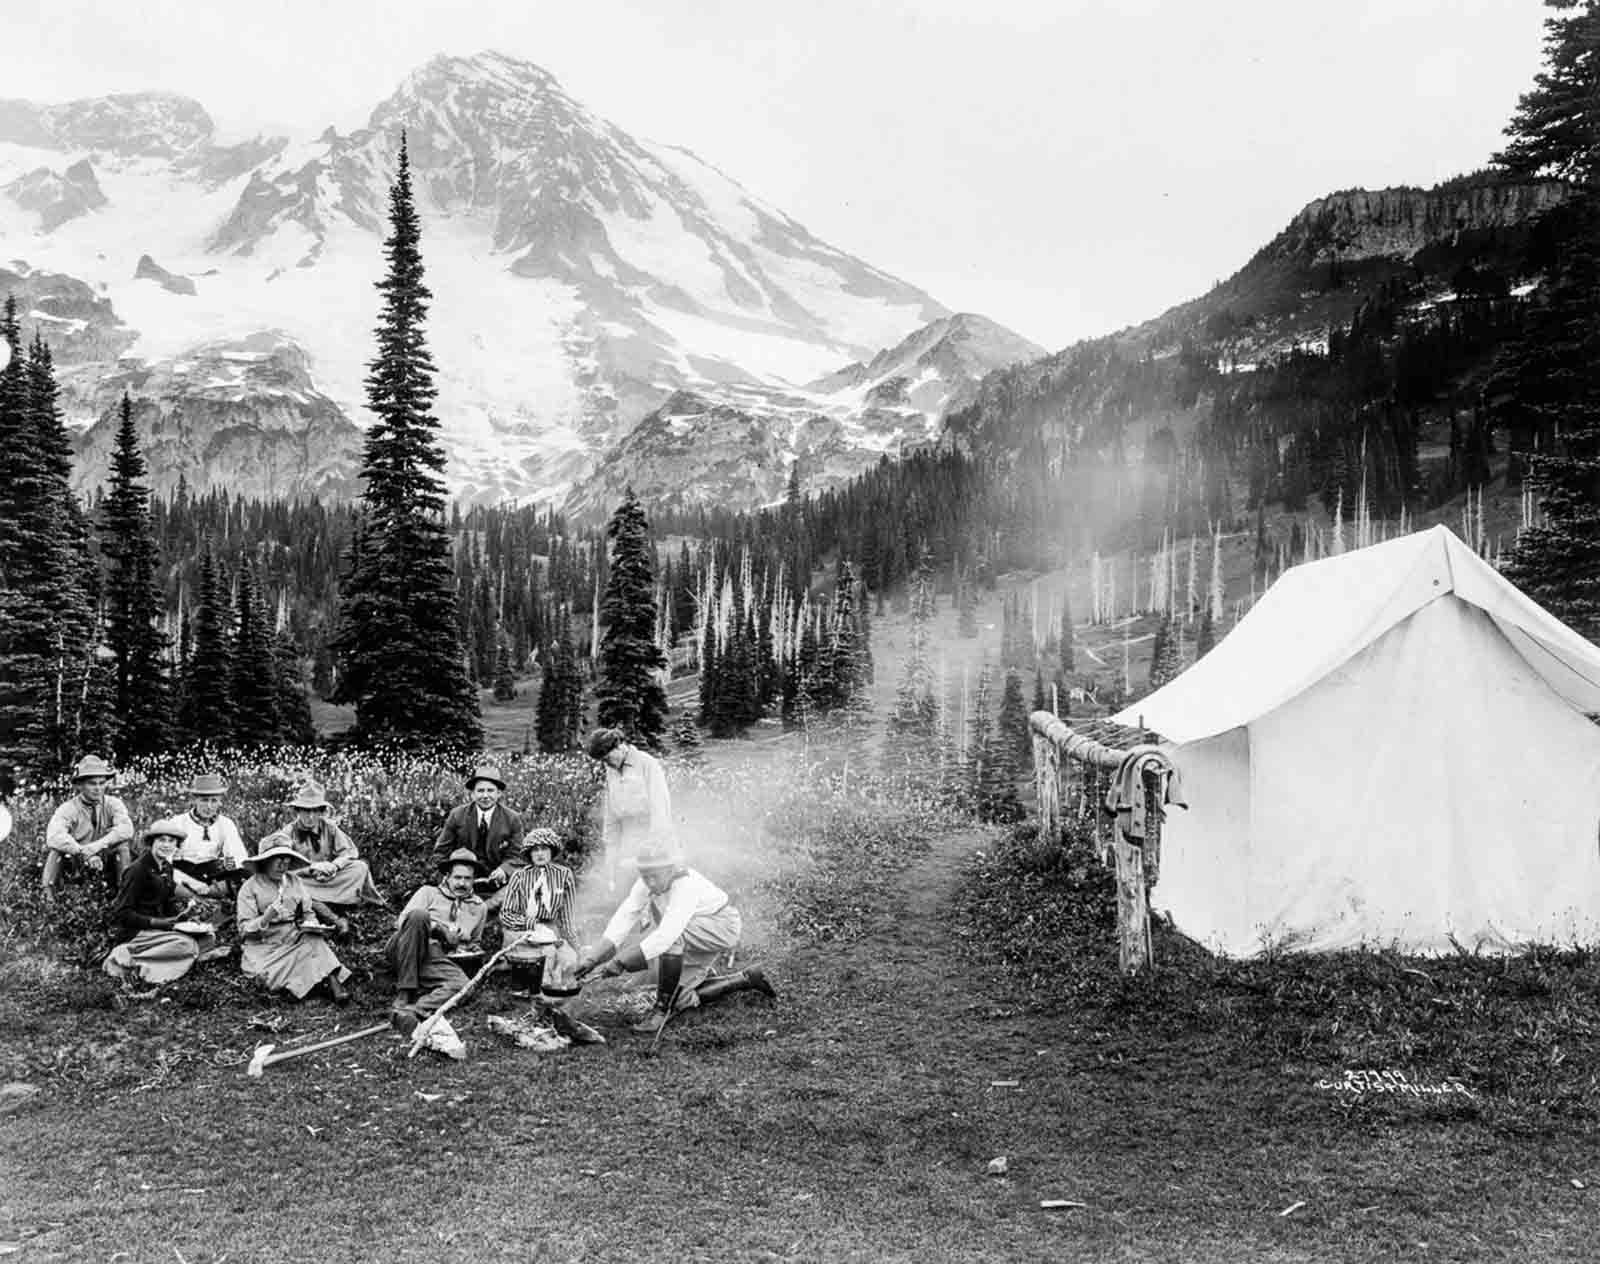 A party of tourists in Mt. Rainier National Park, 1911.